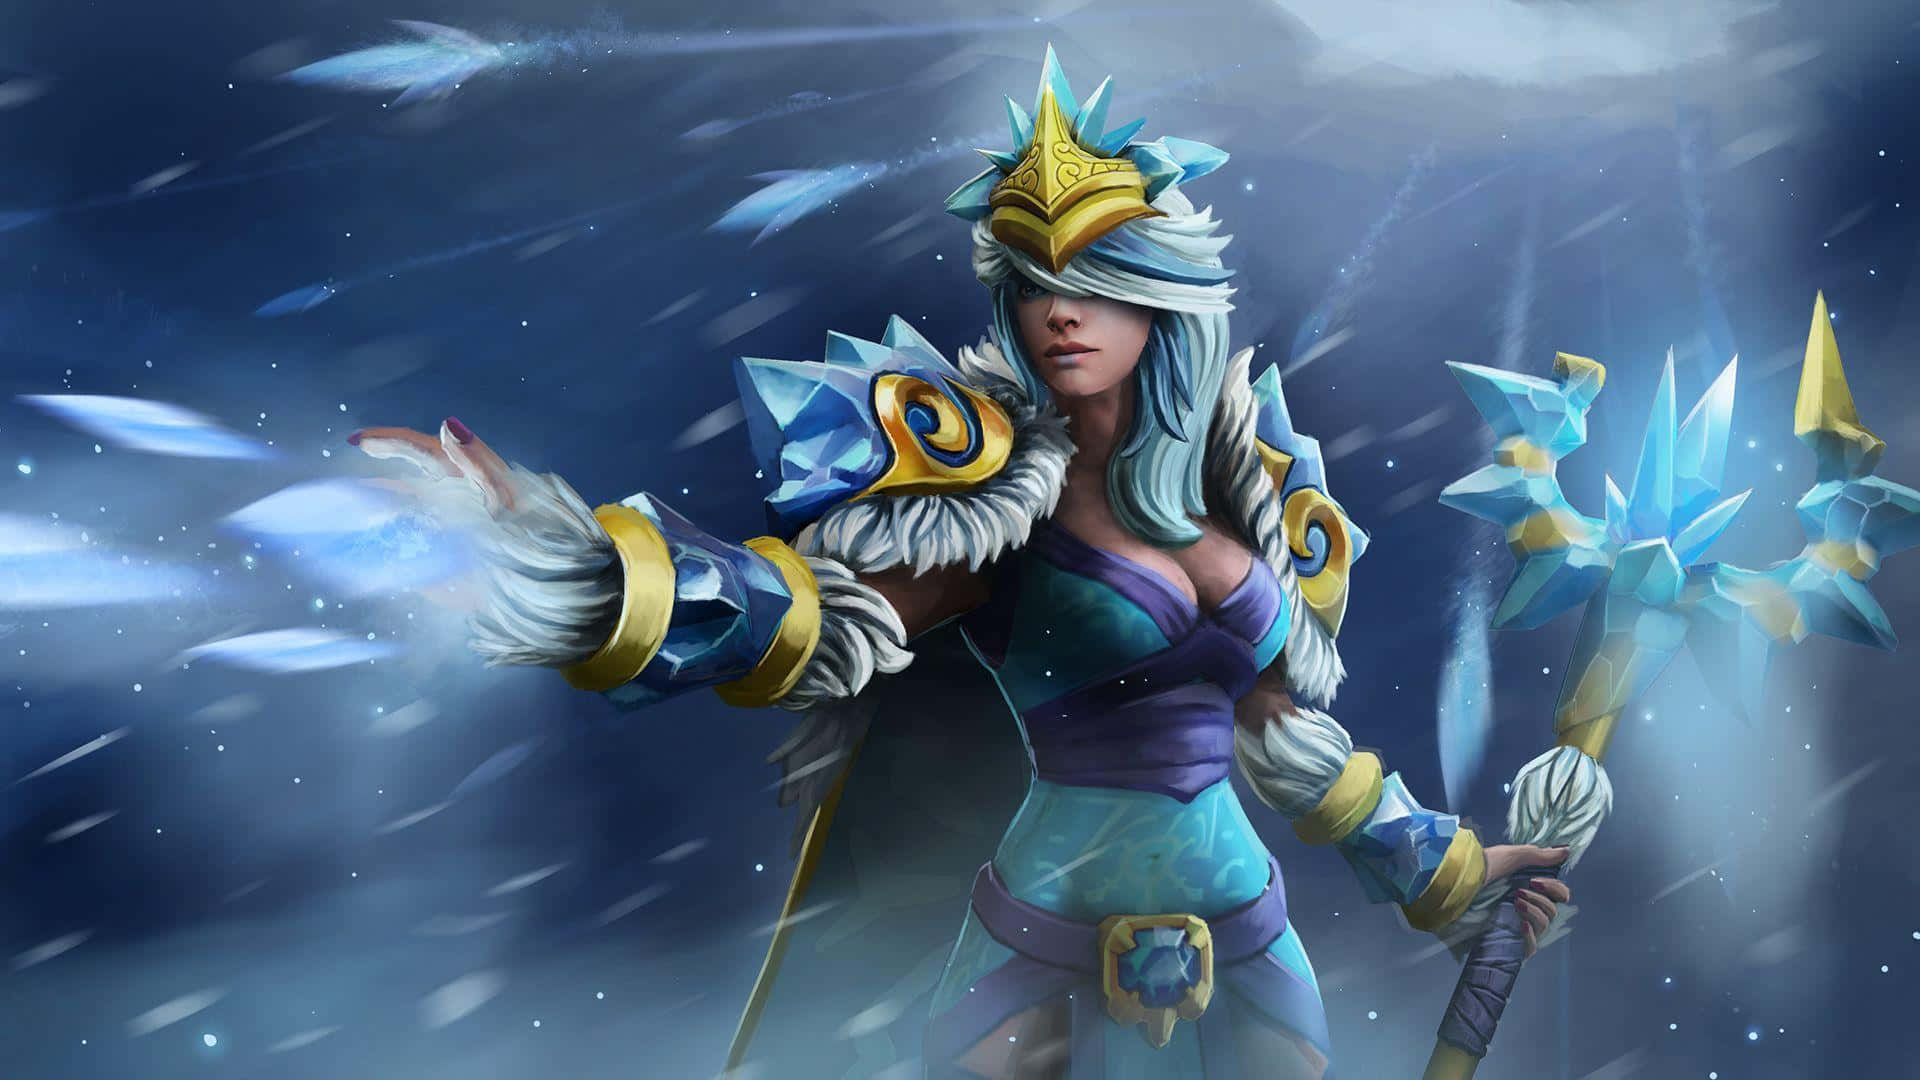 Mystical Crystal Maiden - Unleashing Her Icy Powers Wallpaper